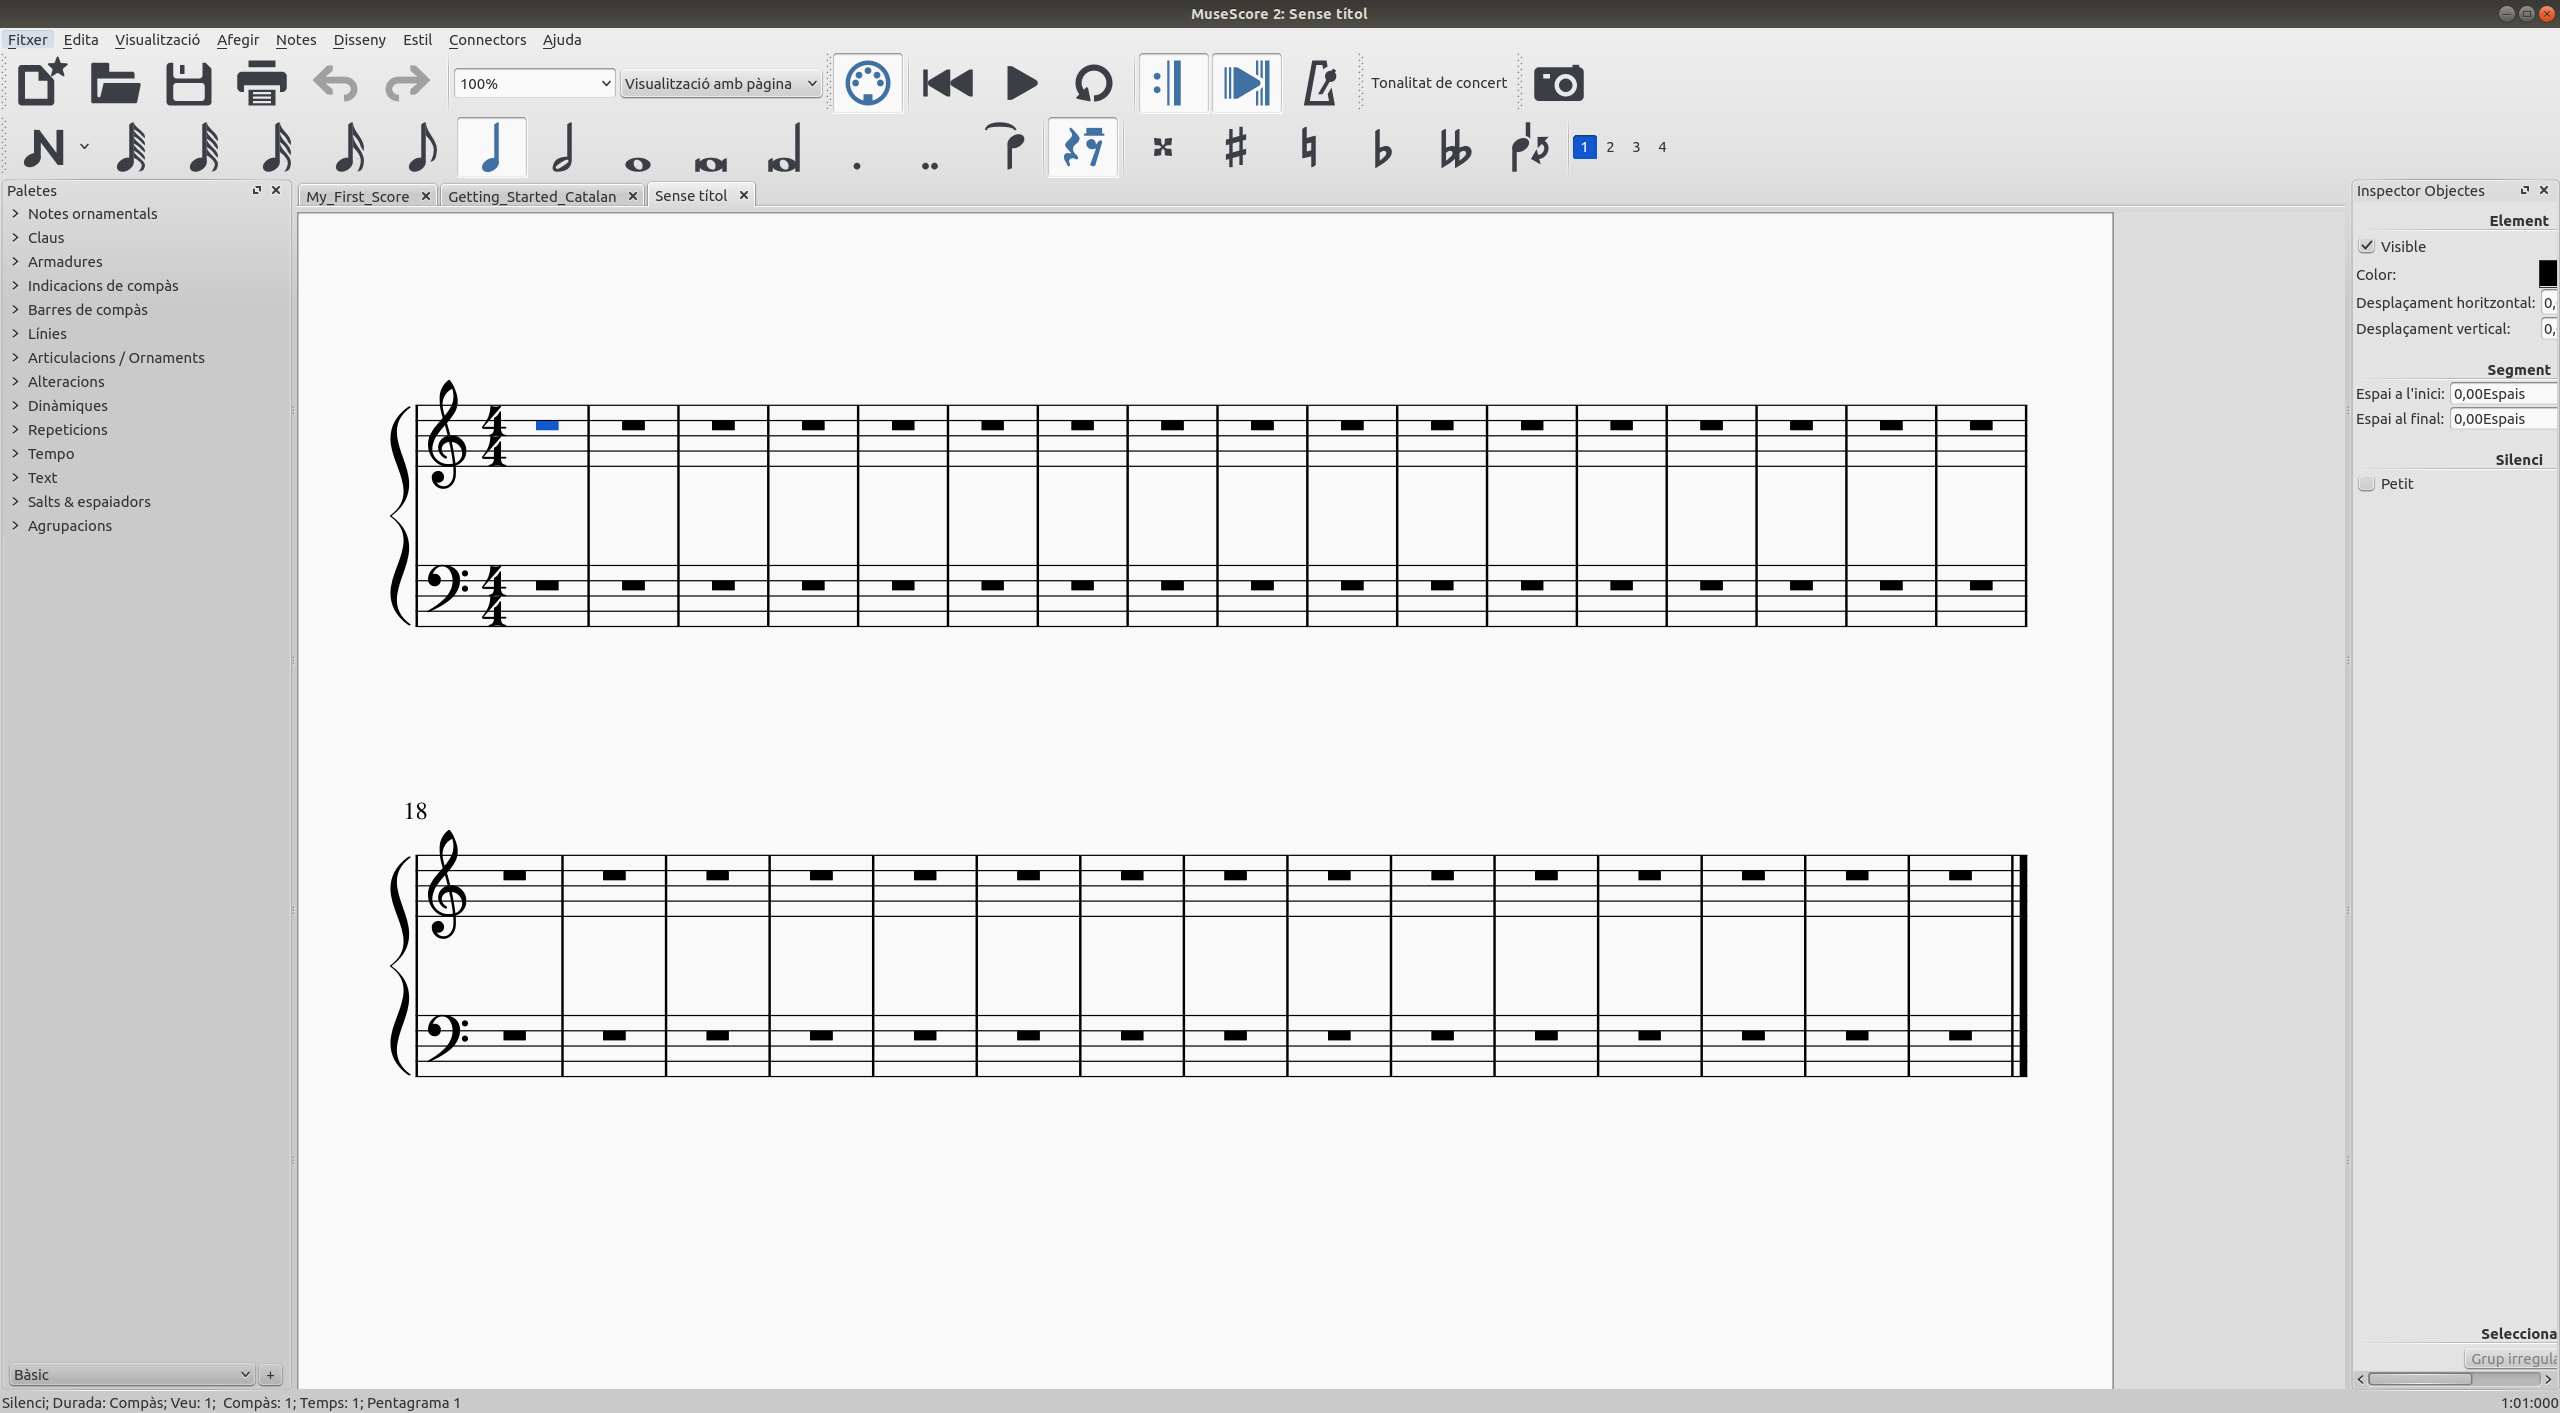 instal the new version for apple MuseScore 4.1